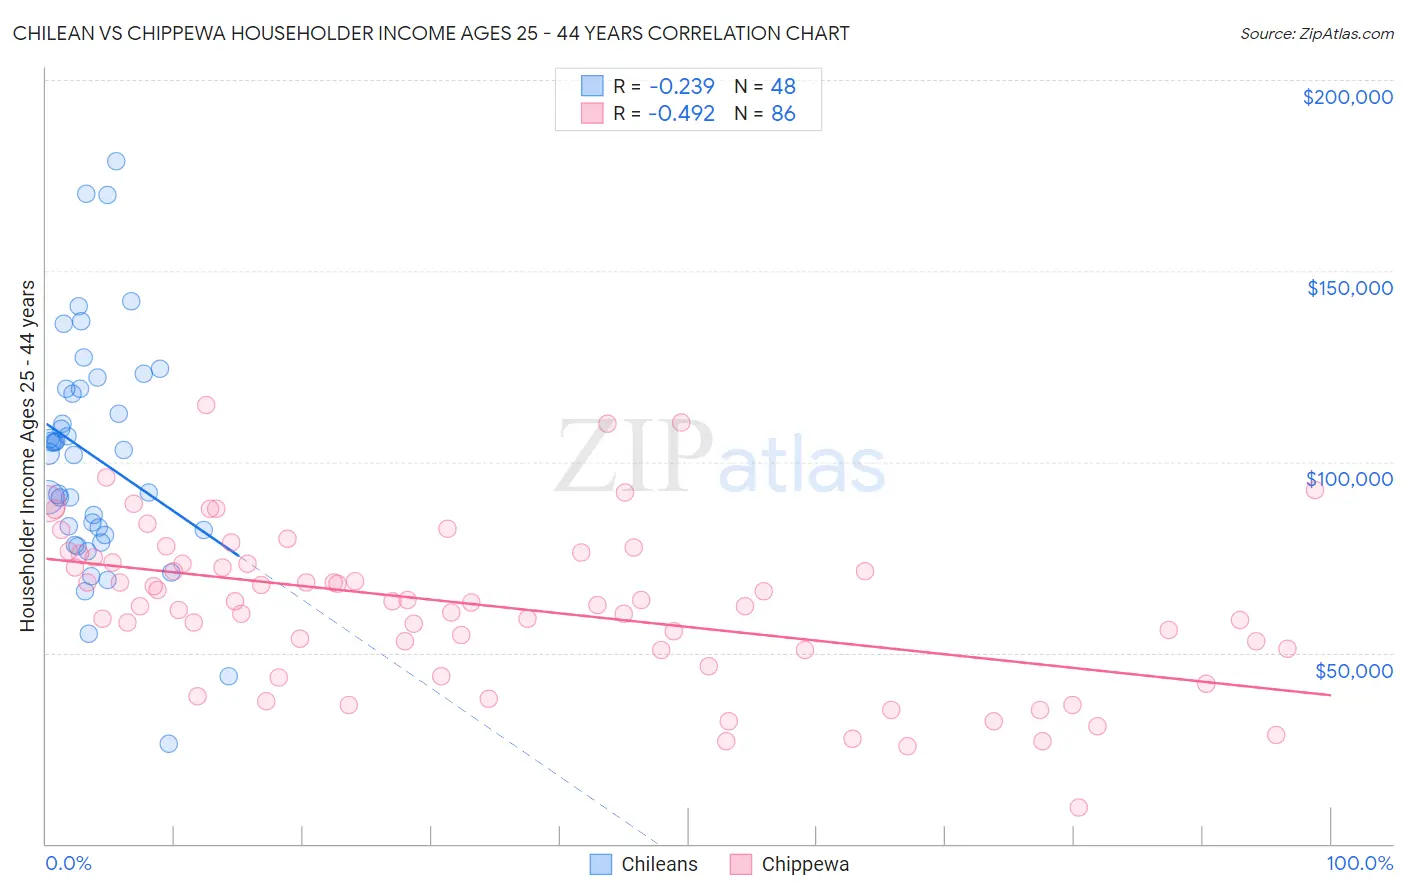 Chilean vs Chippewa Householder Income Ages 25 - 44 years